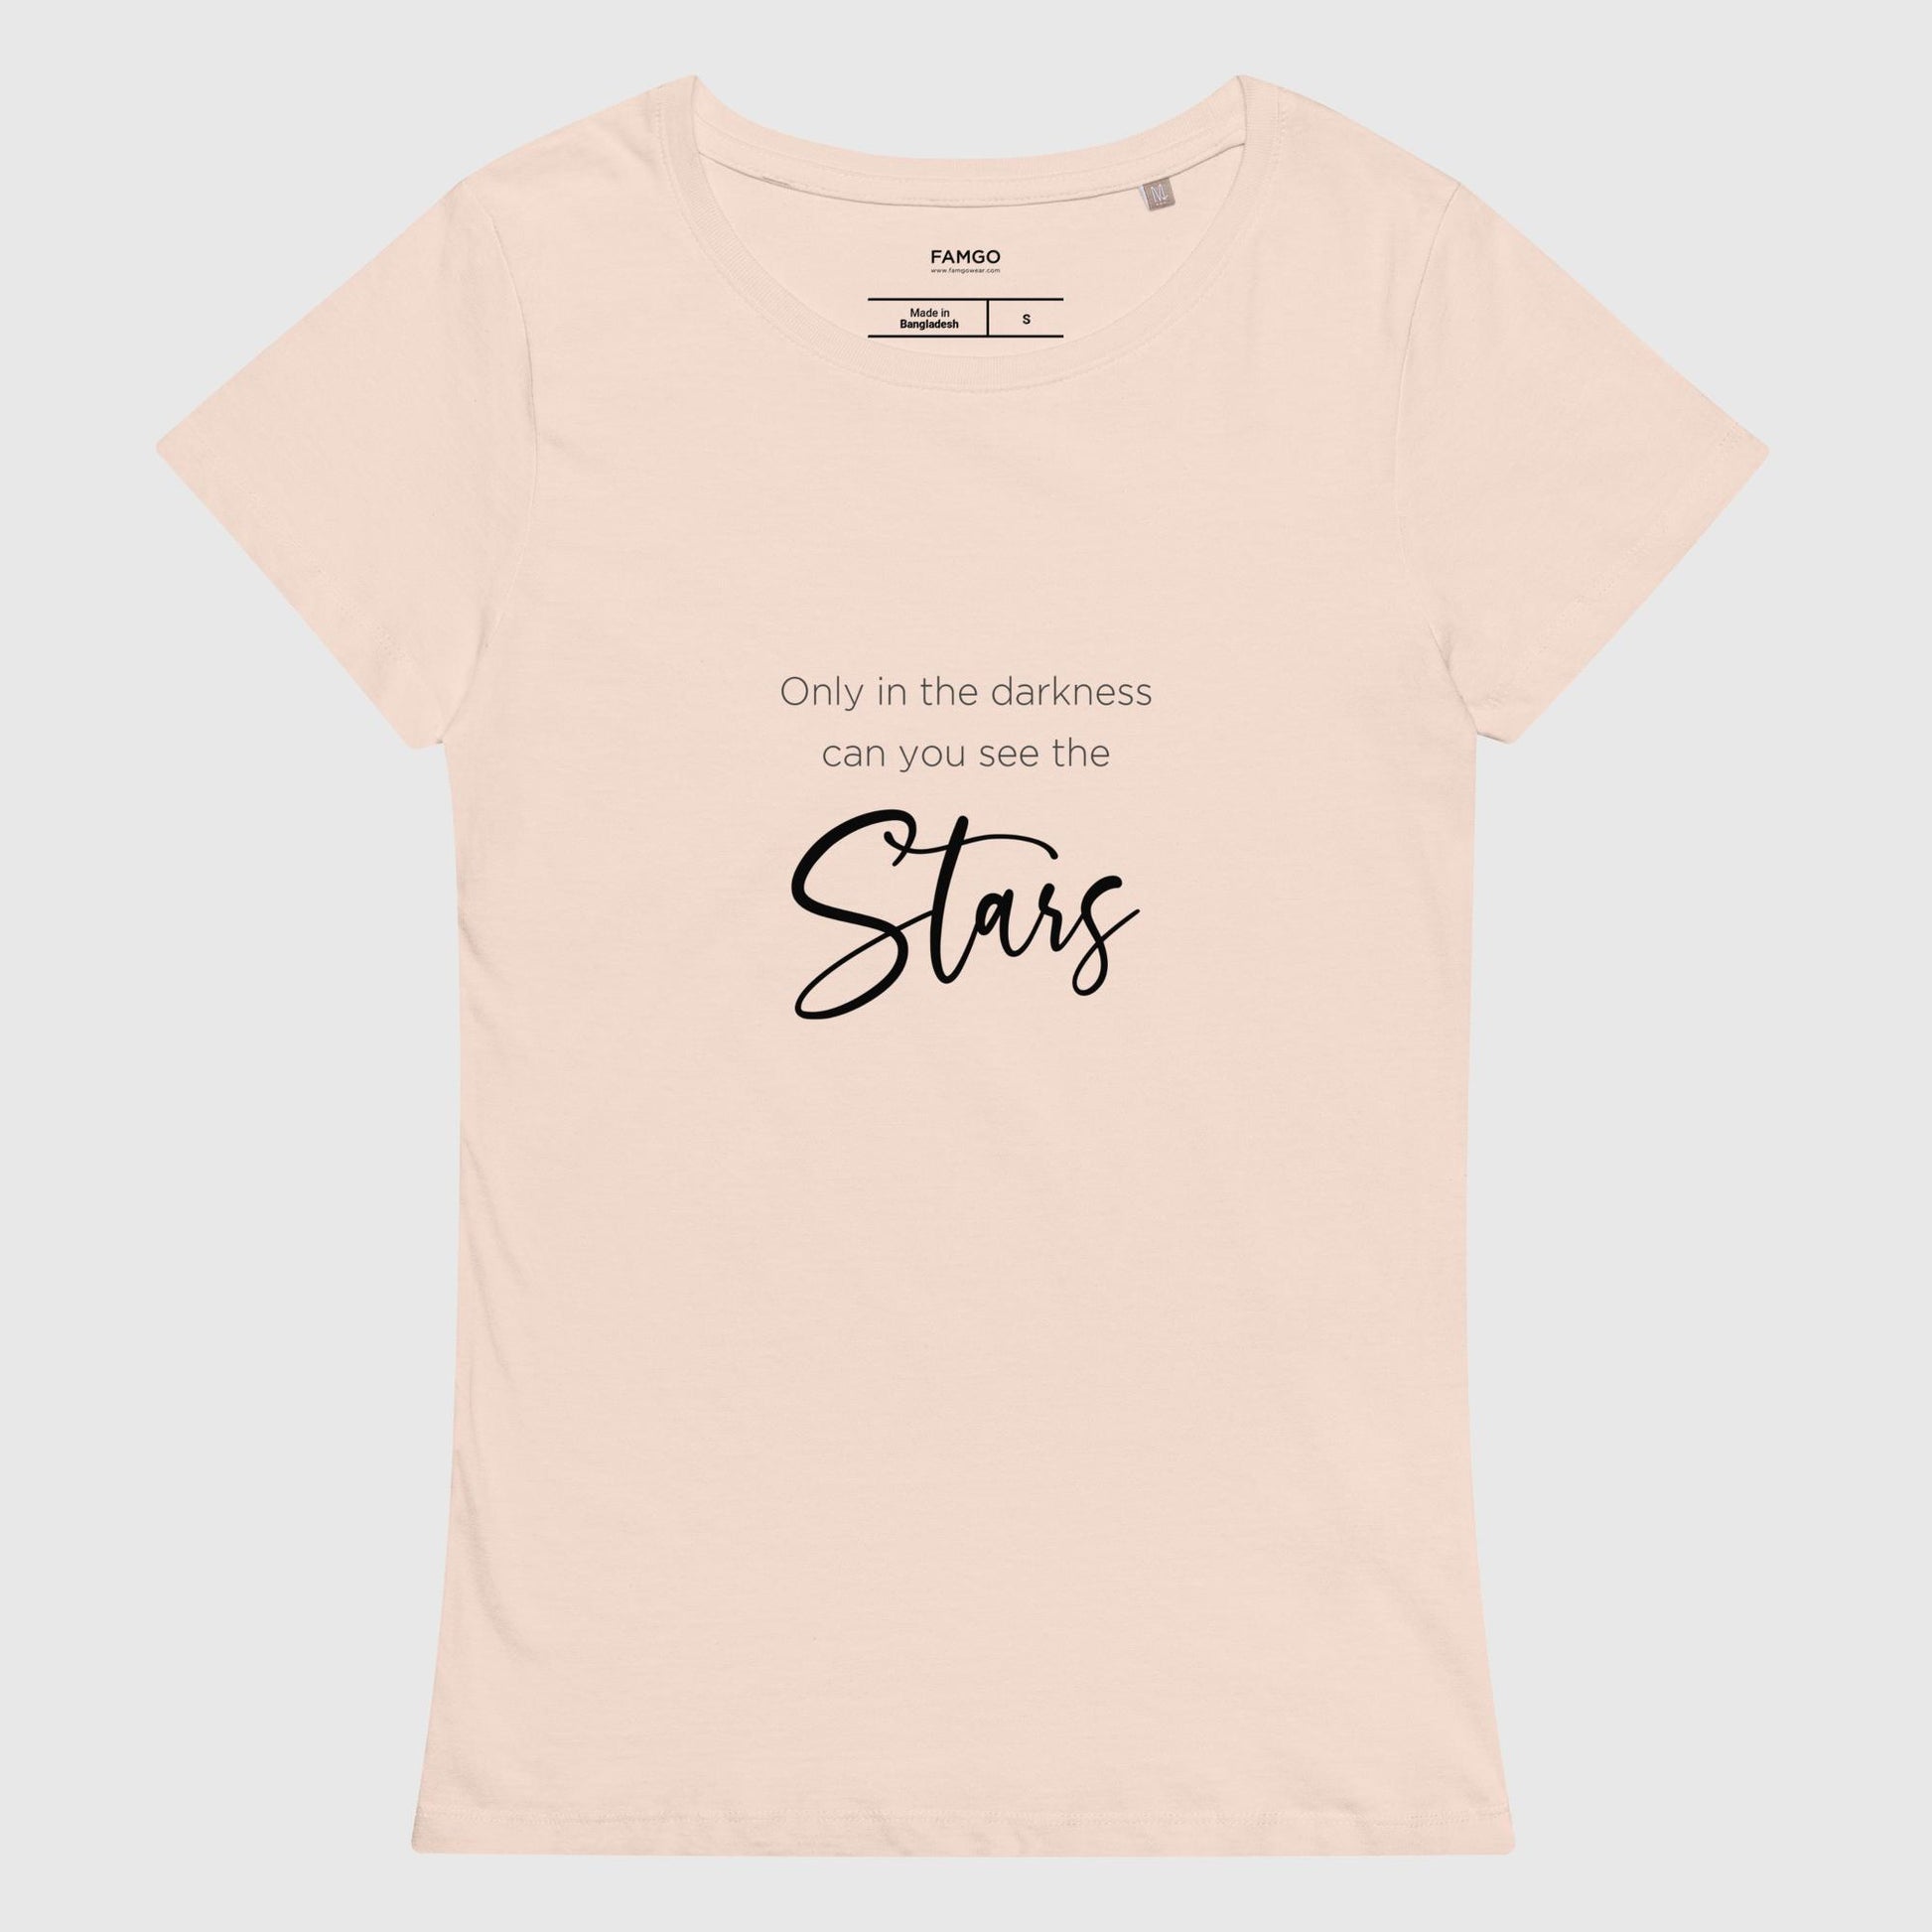 Women's creamy pink organic cotton t-shirt with Dr. Martin Luther King Jr.'s inspirational quote, "Only In The Darkness Can You See The Stars."